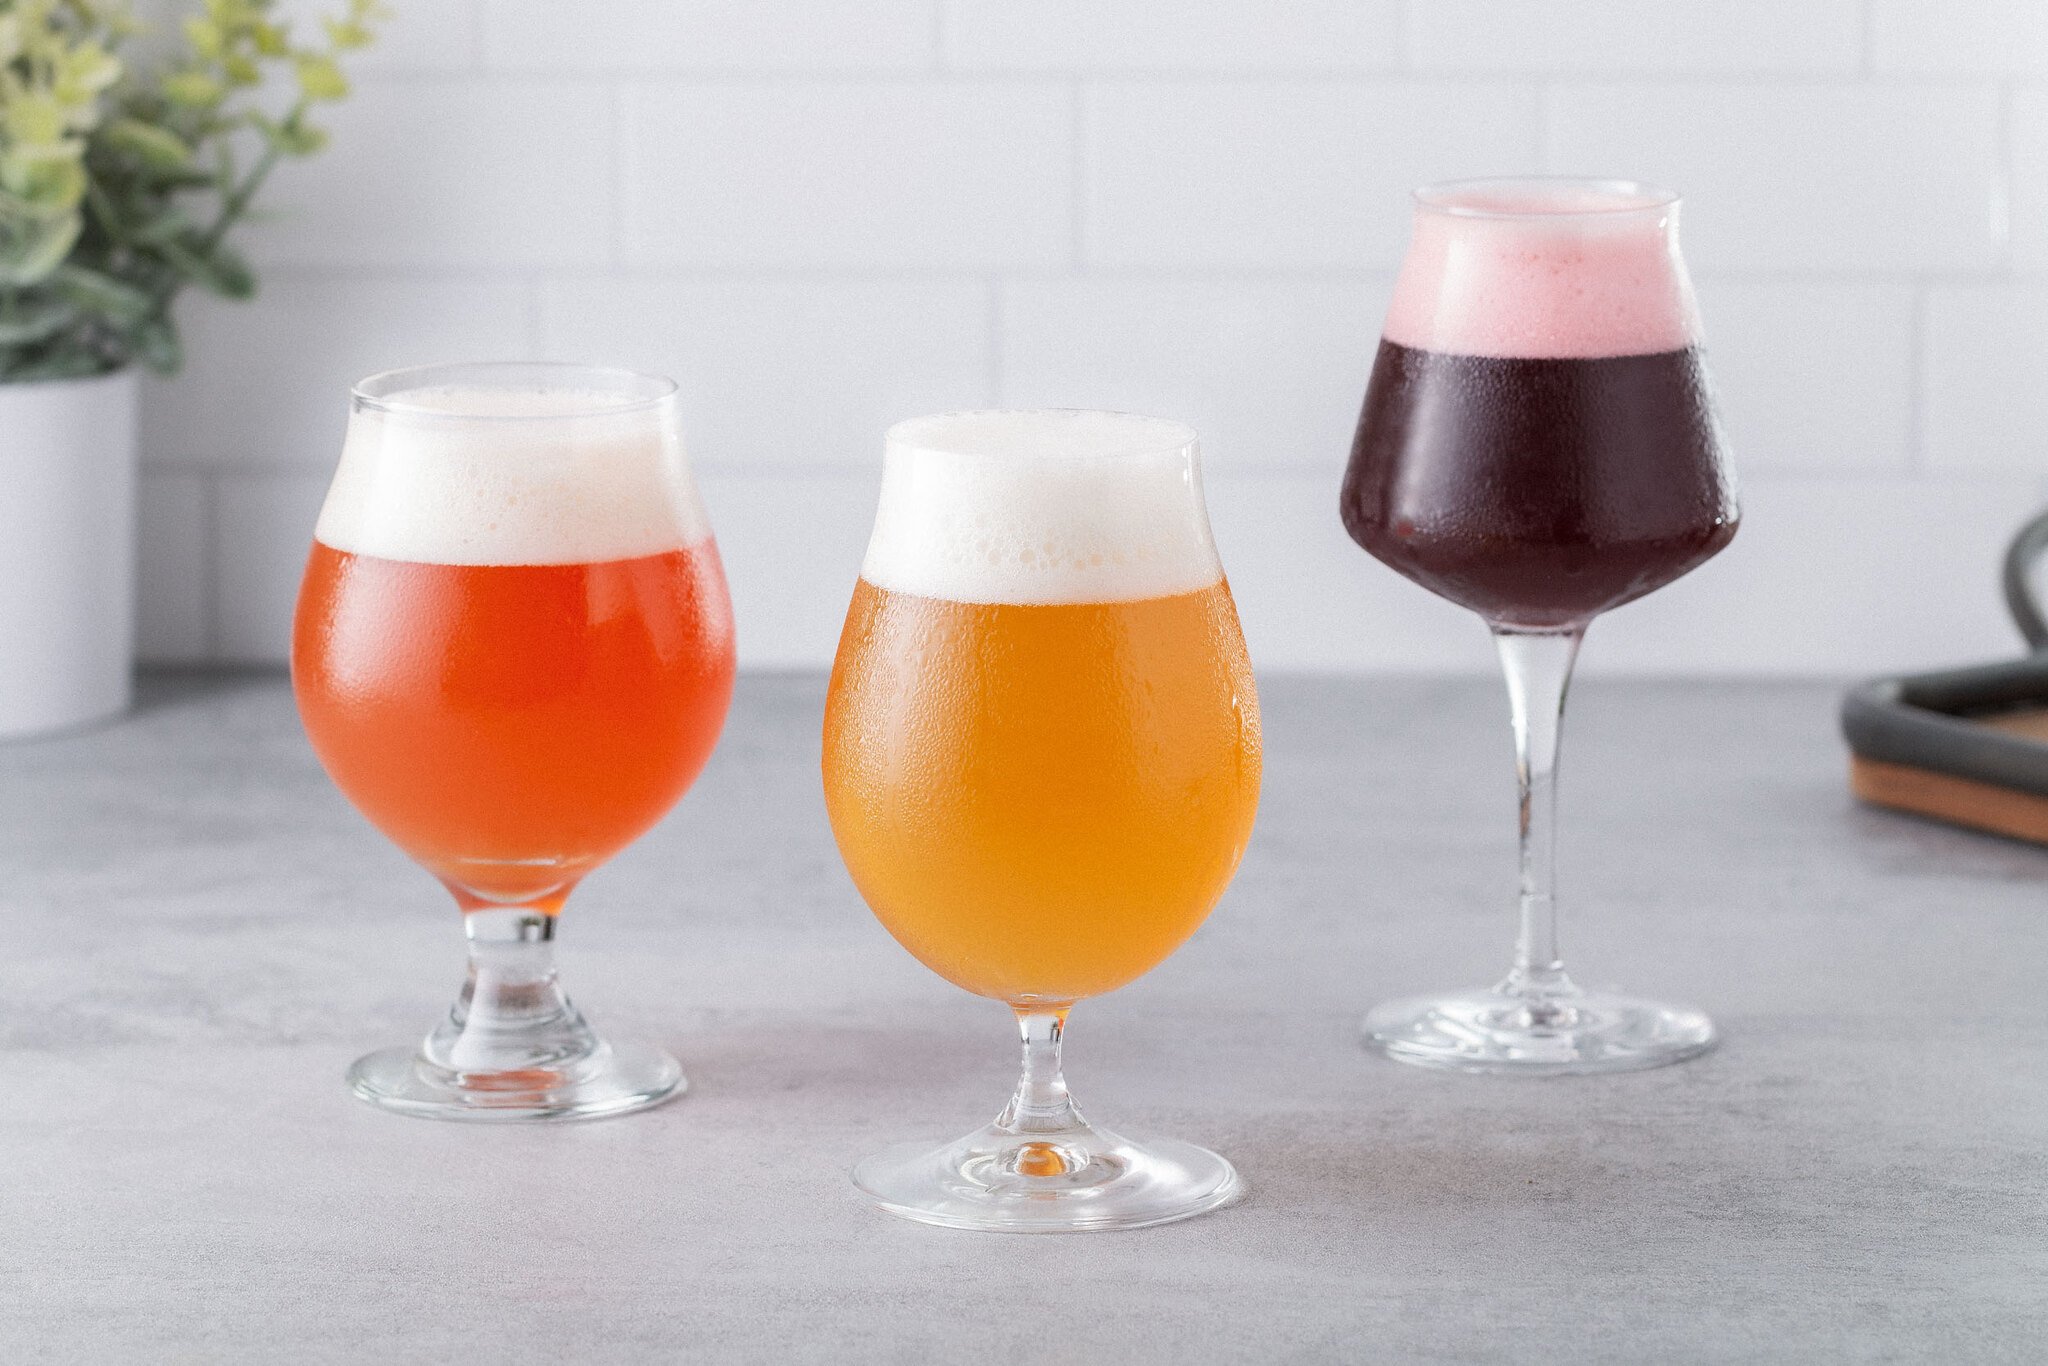 7 Trending Craft Beers (and the Glassware They Need)